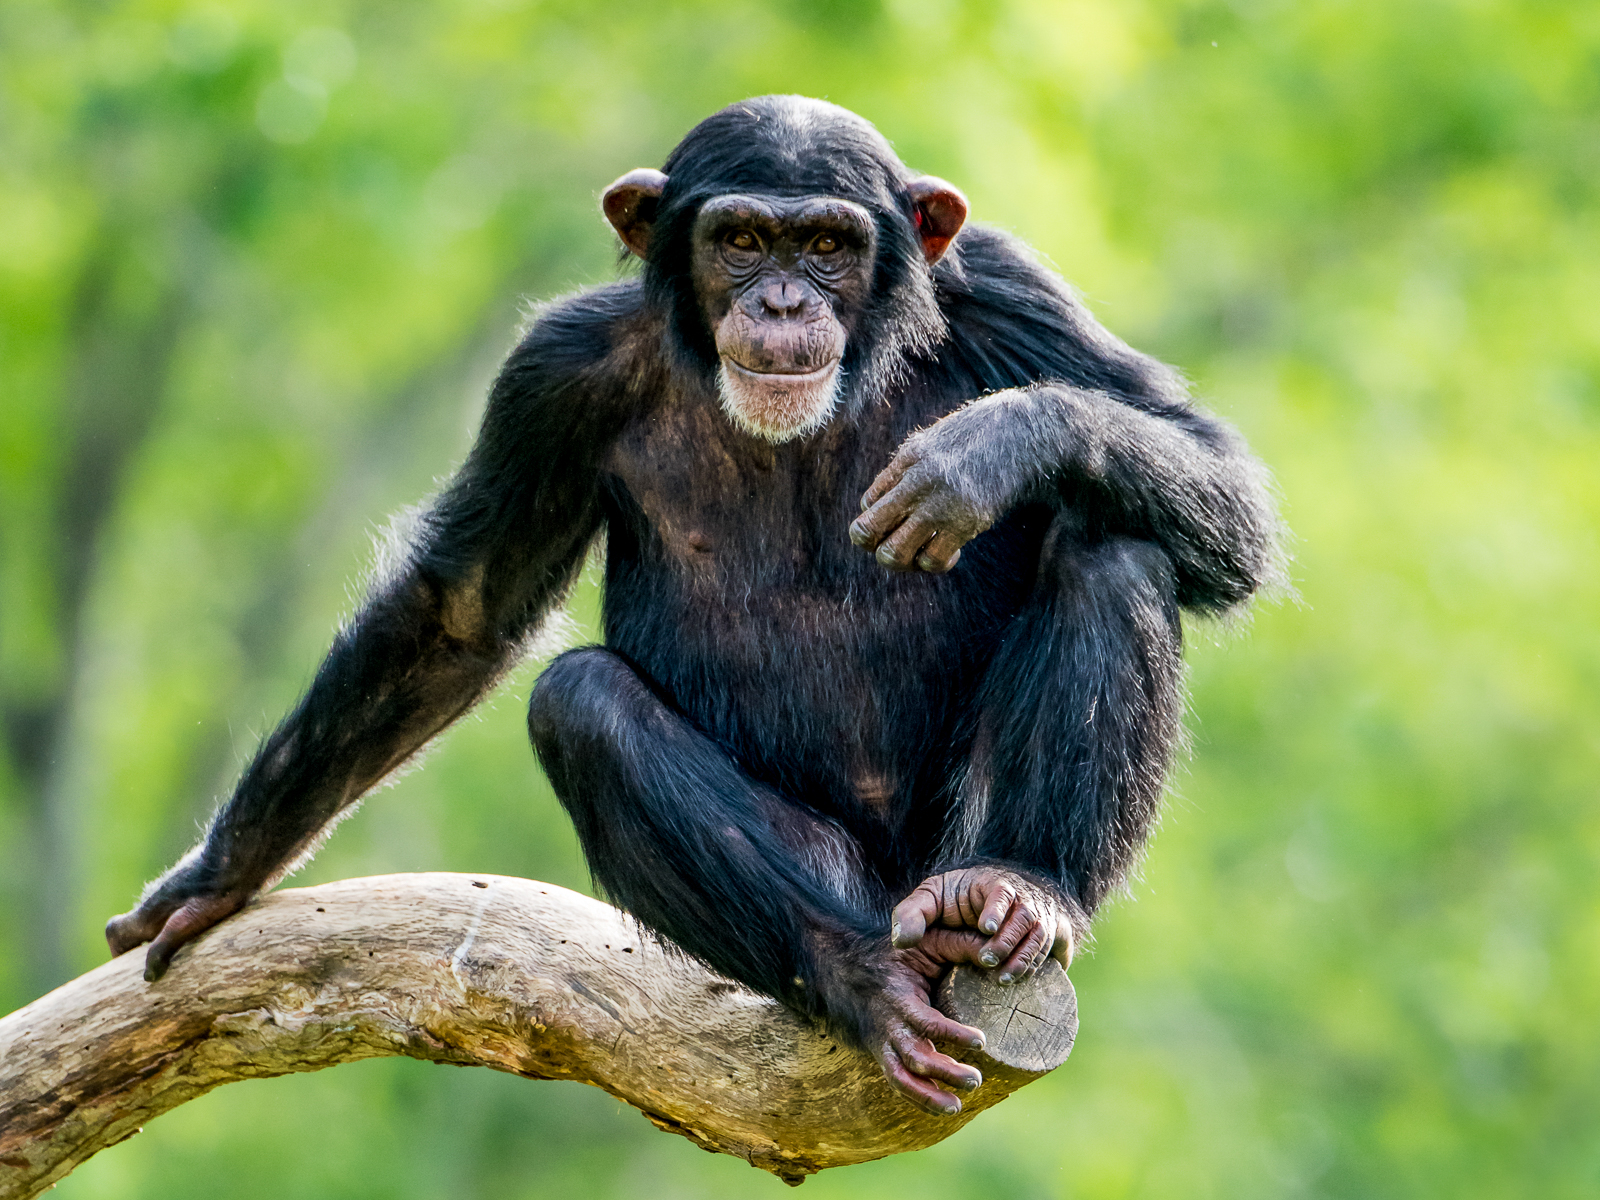 A chimpanzee perched on a branch in Kibale National Park